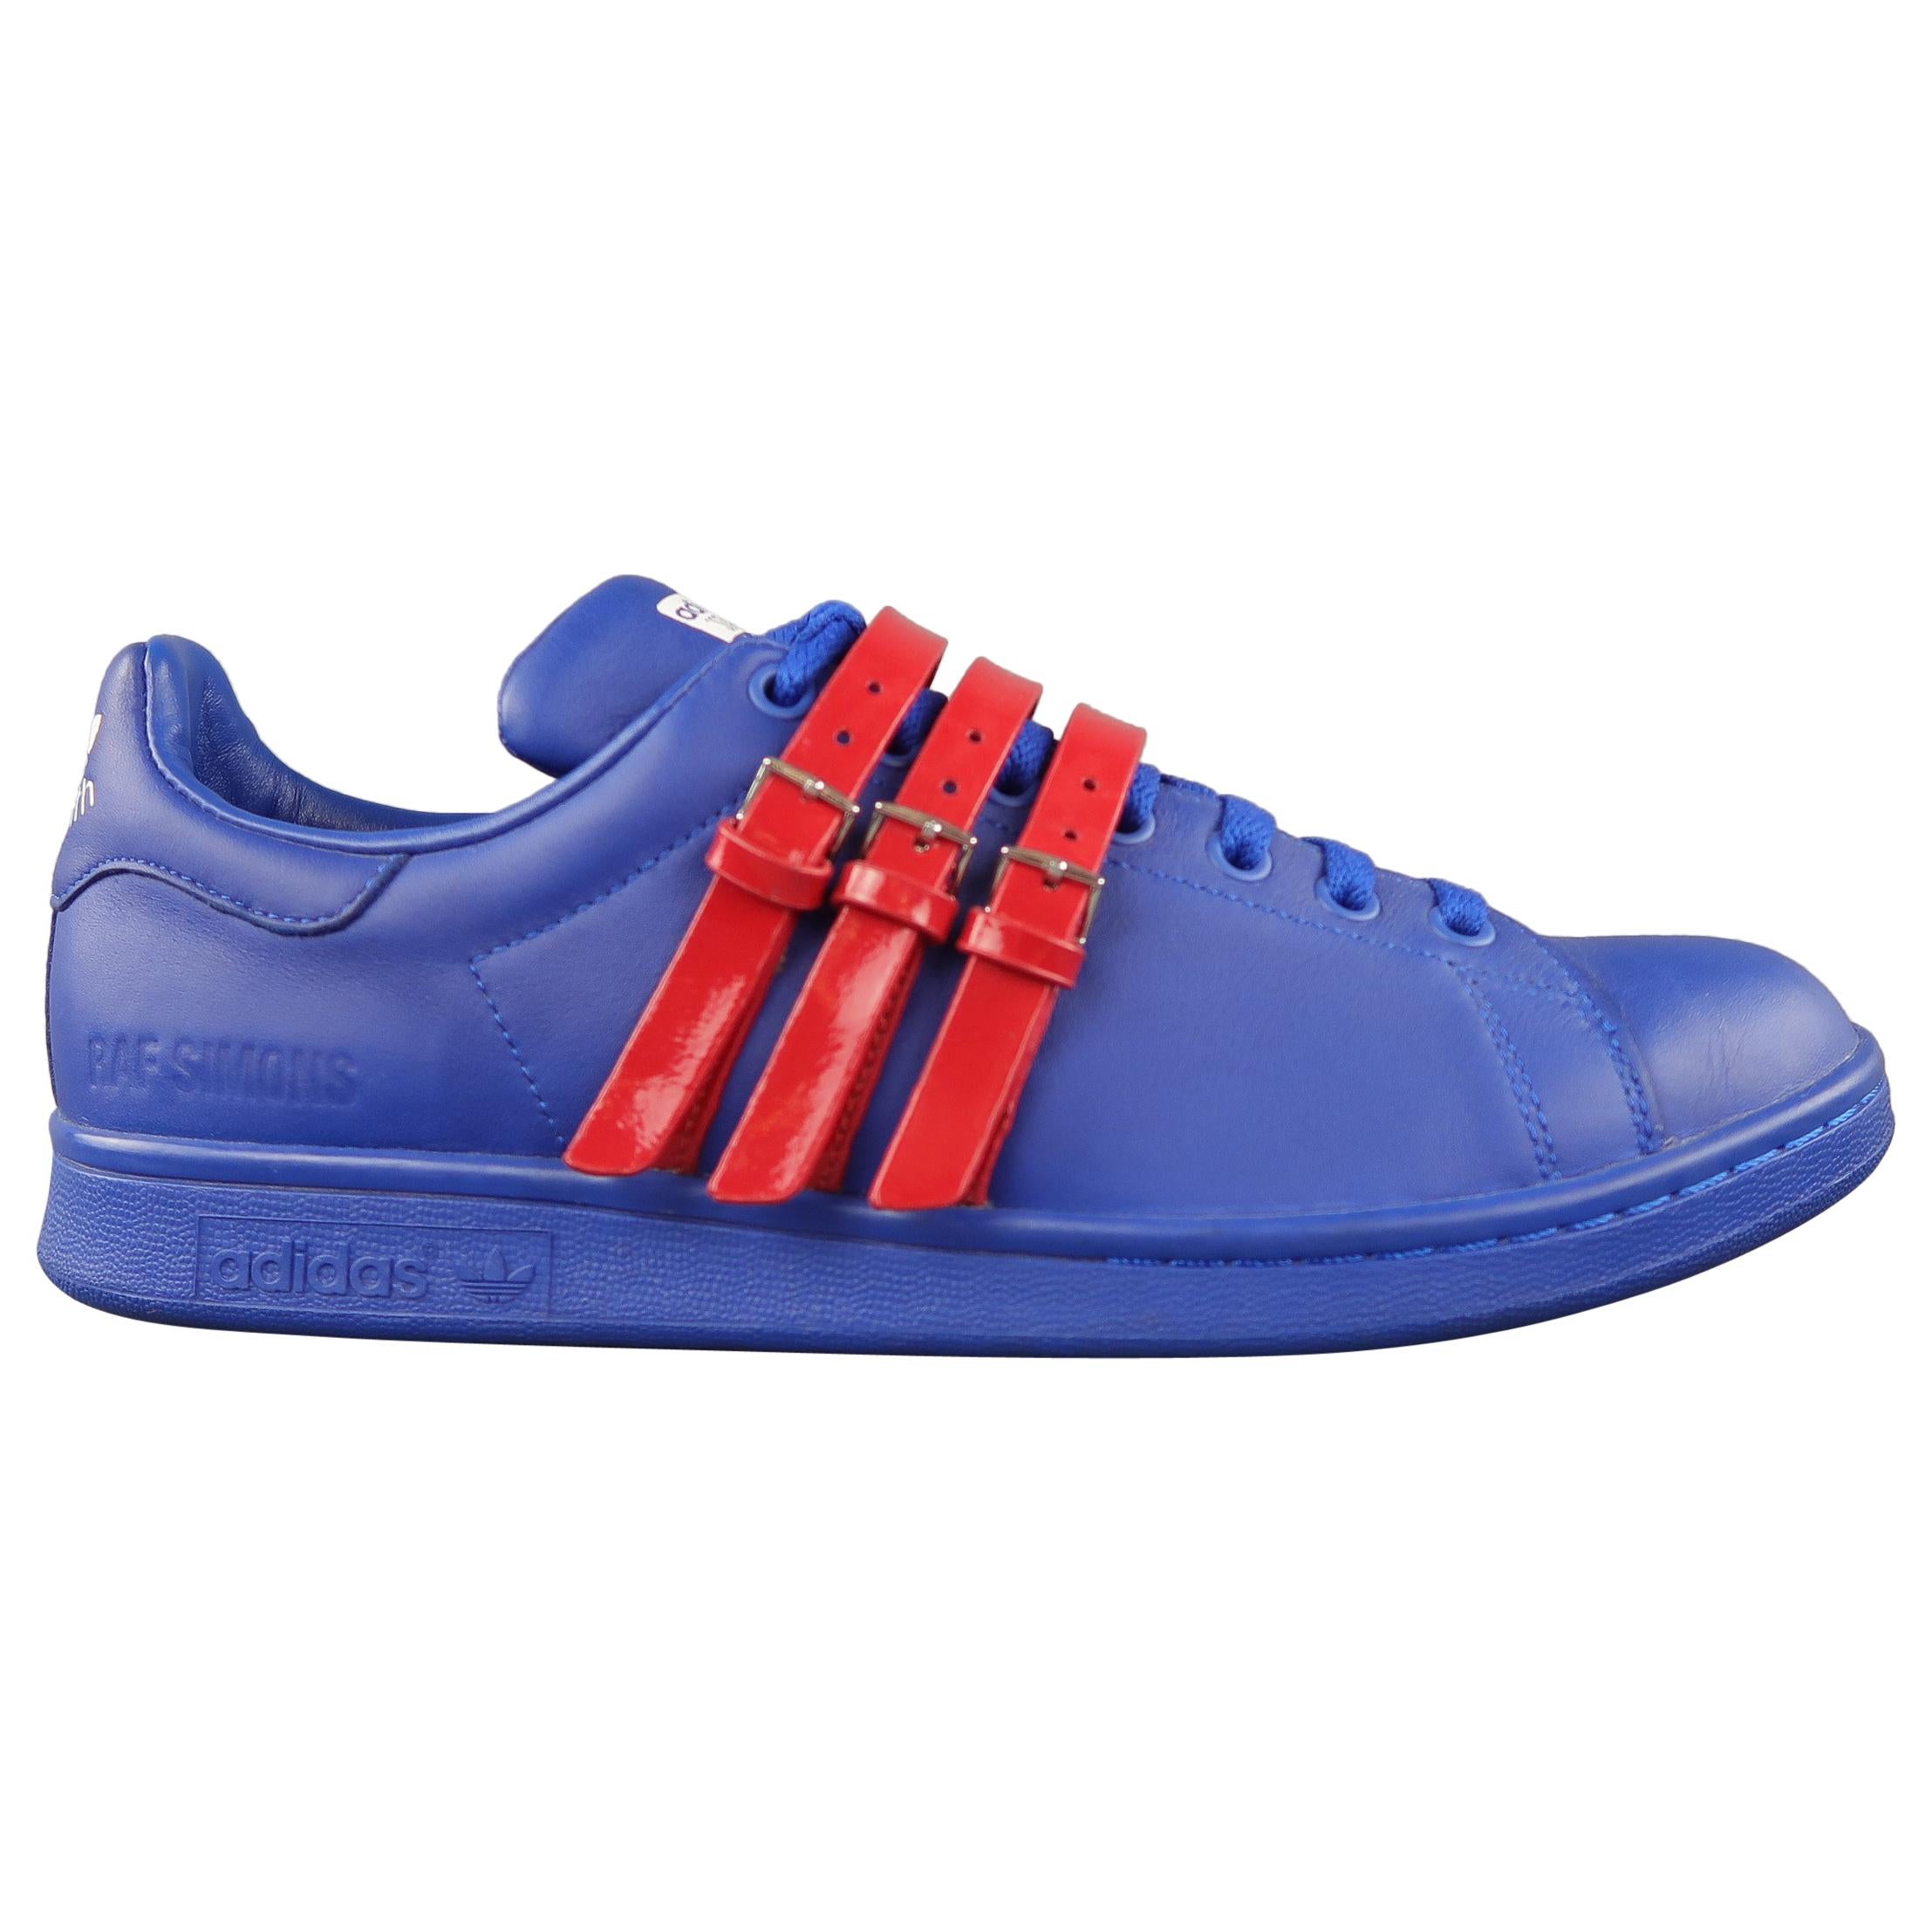 ADIDAS x RAF SIMONS Size 9.5 Royal Blue & Red Leather Stan Smith Sneakers